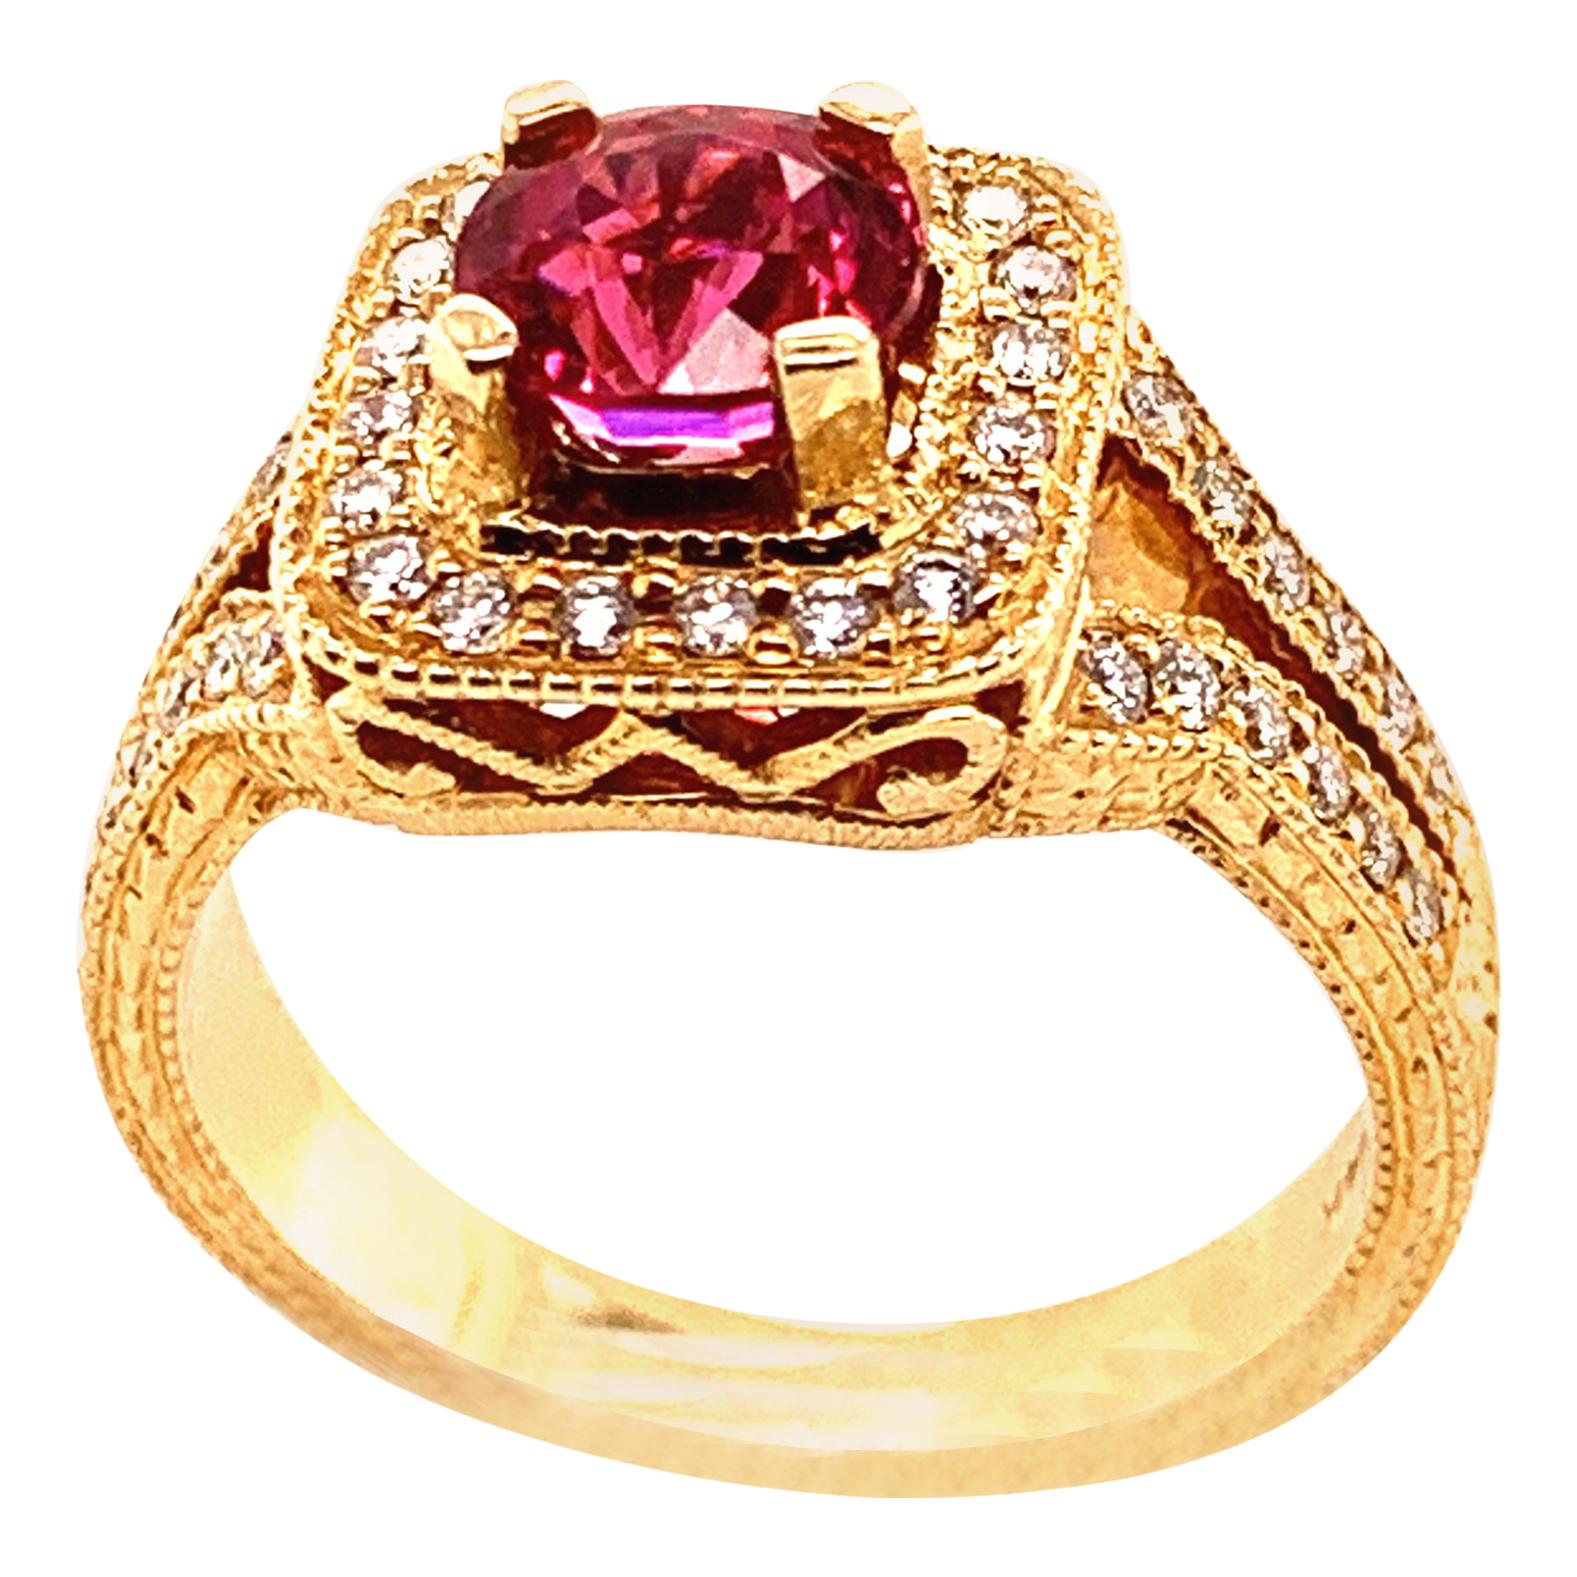 Natural Burma Red Spinel and Diamond 14 Karat Yellow Gold Ring For Sale